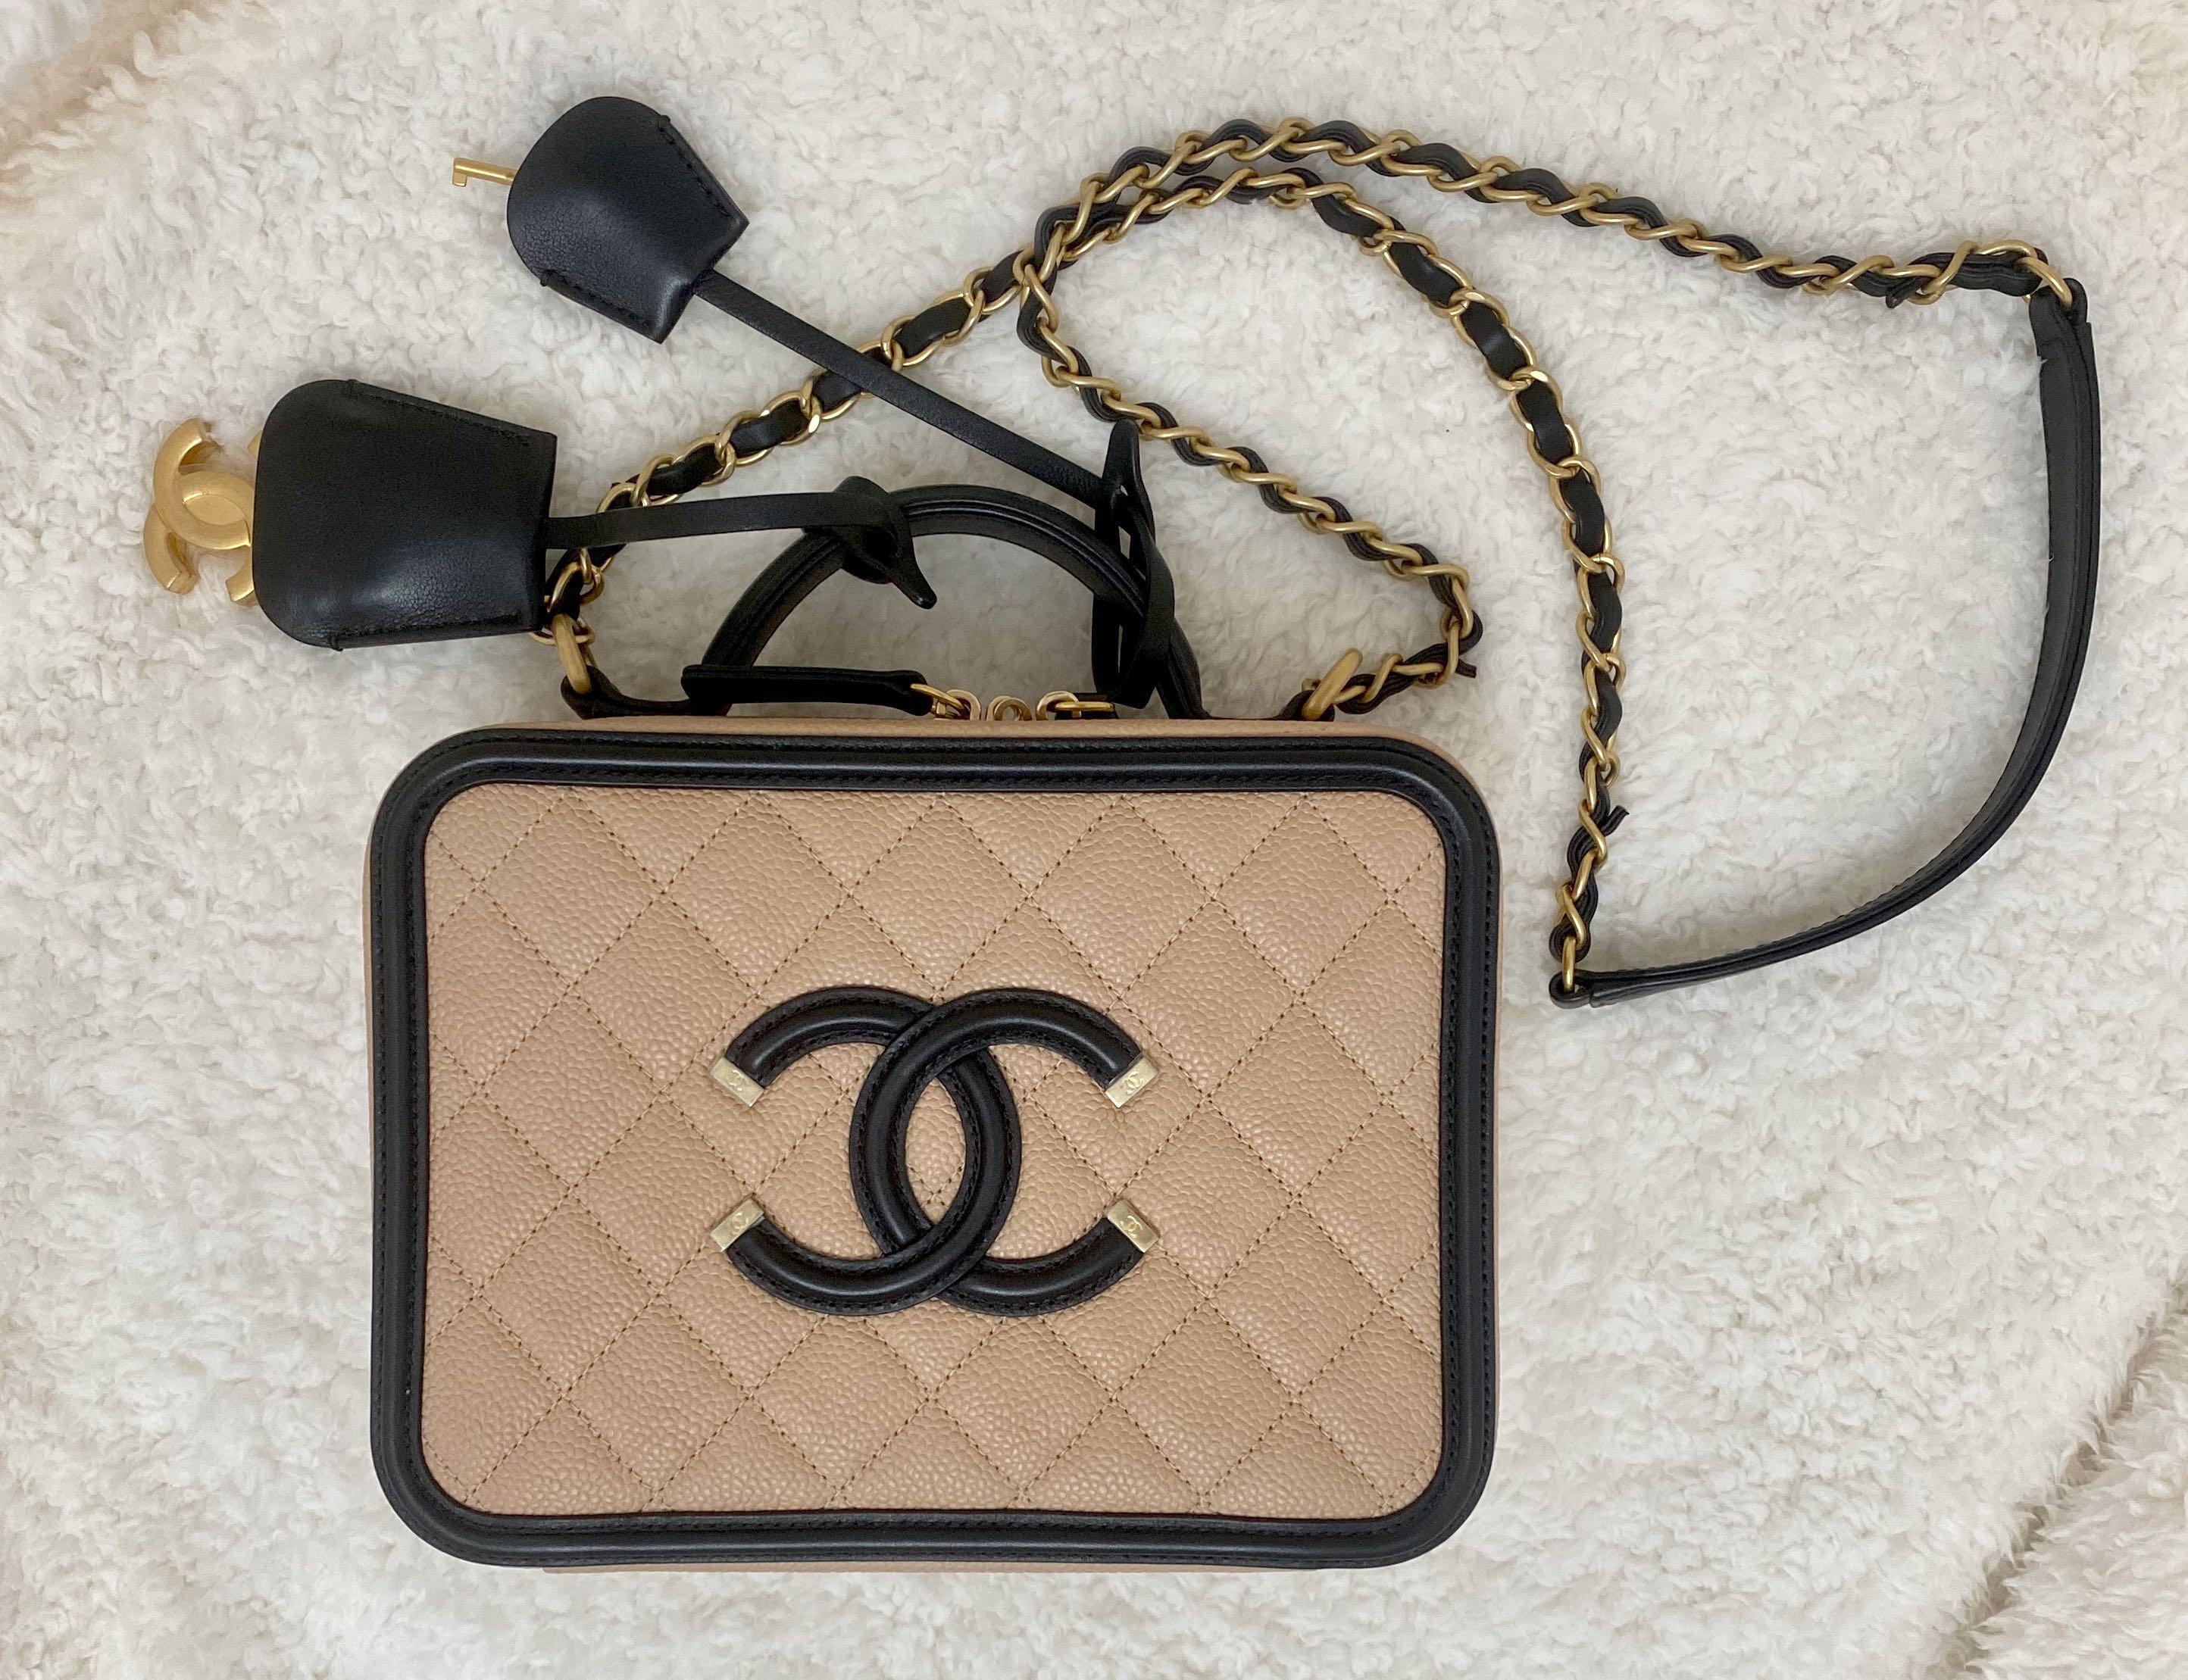 3D model Chanel Quilted CC Filigree Monochromatic Pastel Vanity Case Bag VR  / AR / low-poly